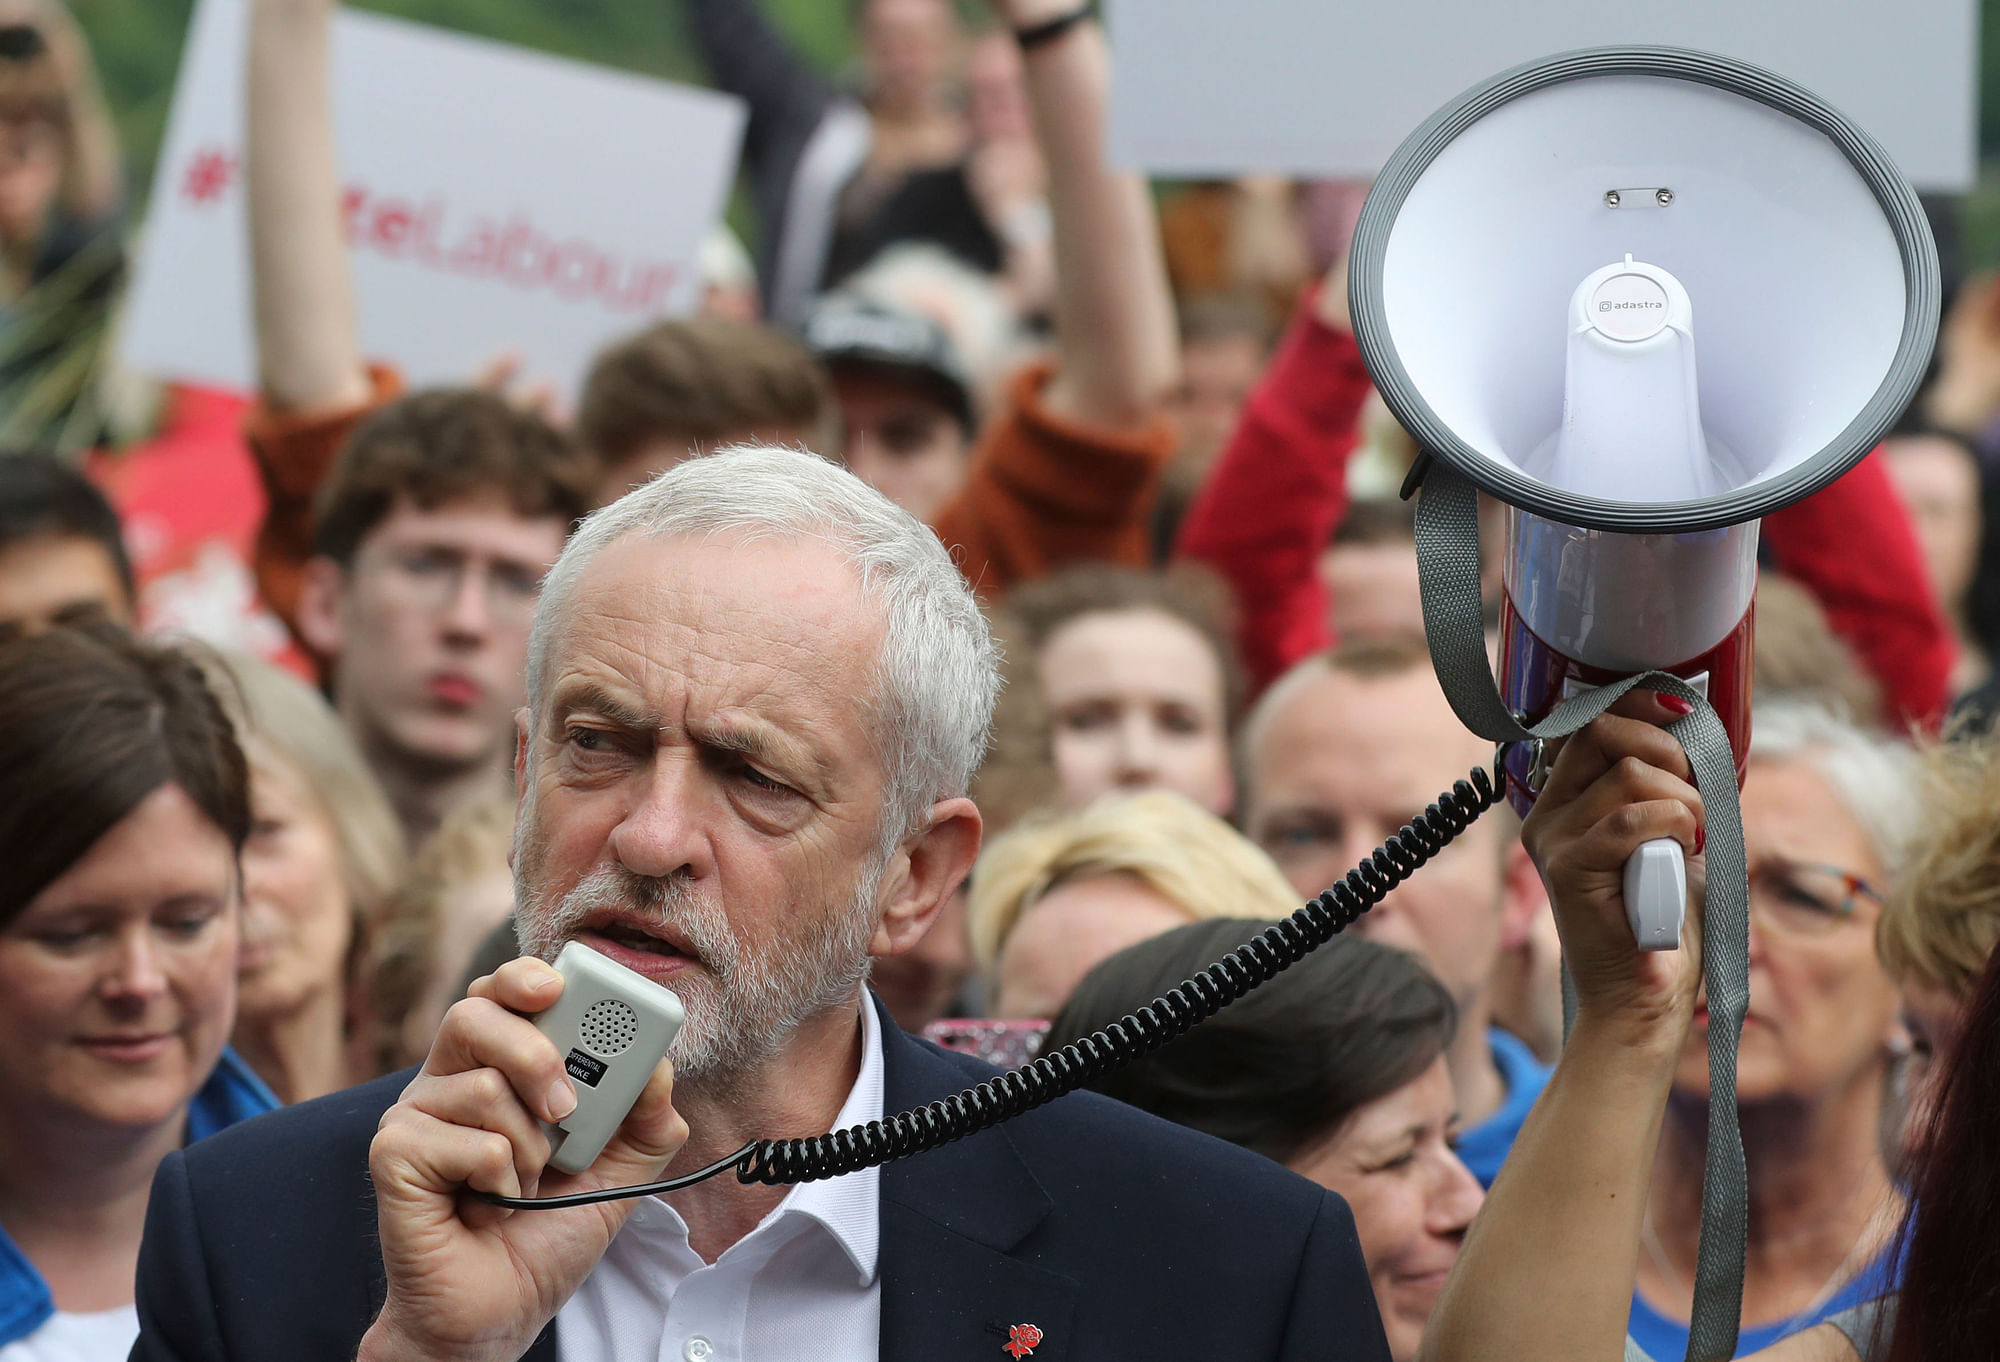 Jeremy Corbyn, Britain’s Opposition leader, stated in his party manifesto ahead of the elections, that his party would independently inquire into the UK’s role in Operation Blue Star. (Photo Courtesy: Owen Humphreys / AP)